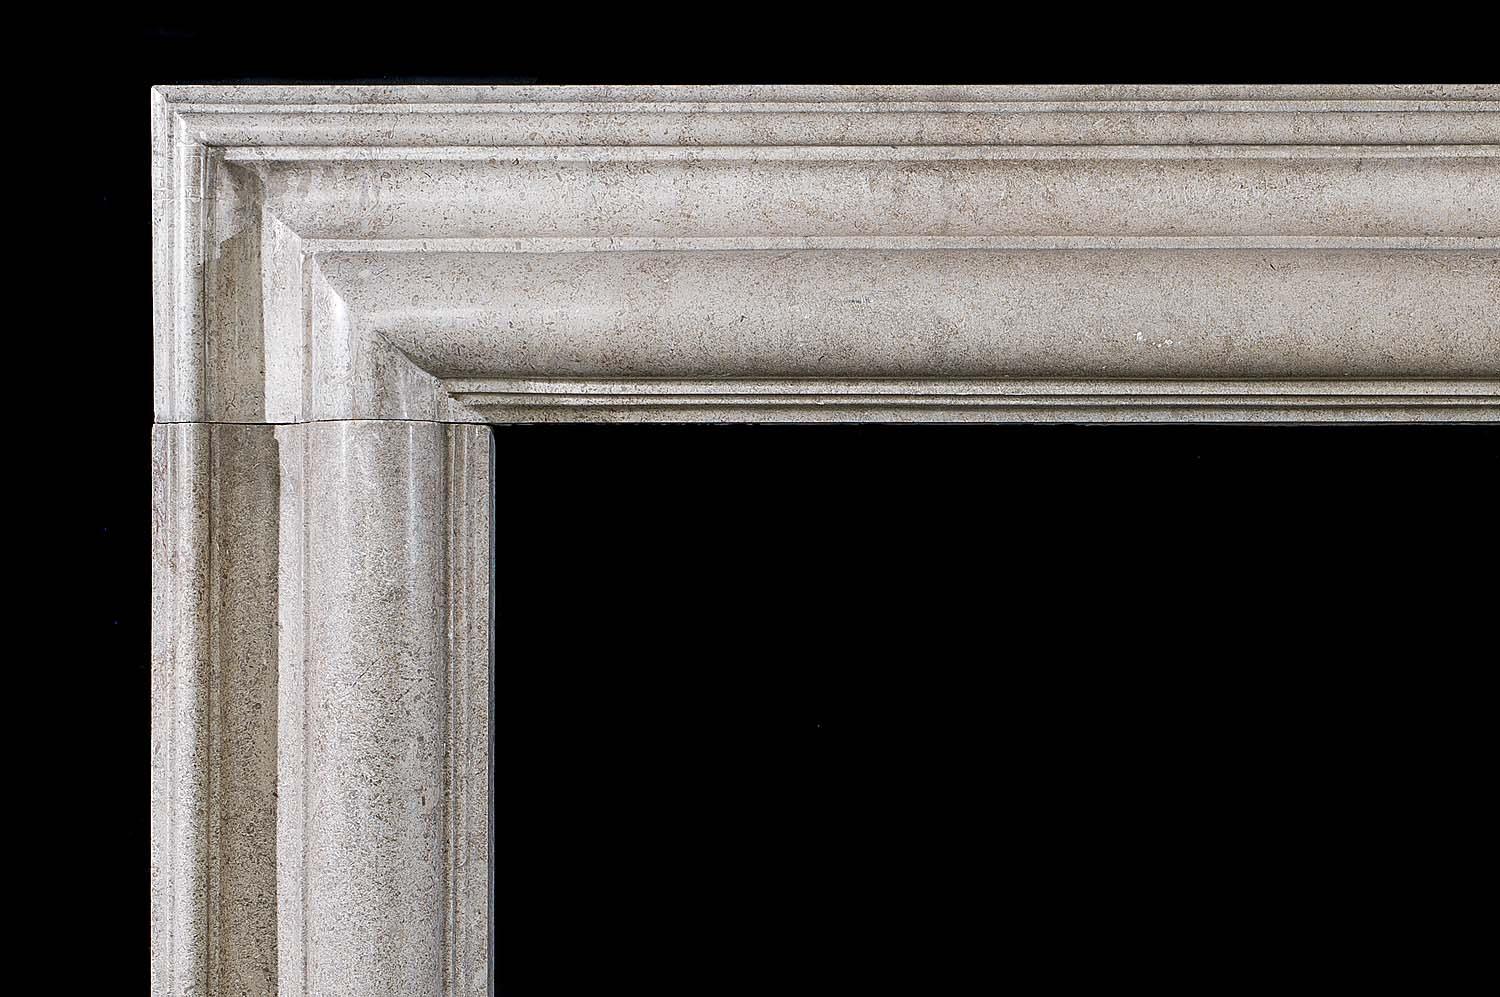 A large, late Victorian Derbyshire Fossil Limestone Bolection fire surround with a polished satin finish. The moulded frieze and jambs raised on substantial and sturdy foot blocks.
English, circa 1900.